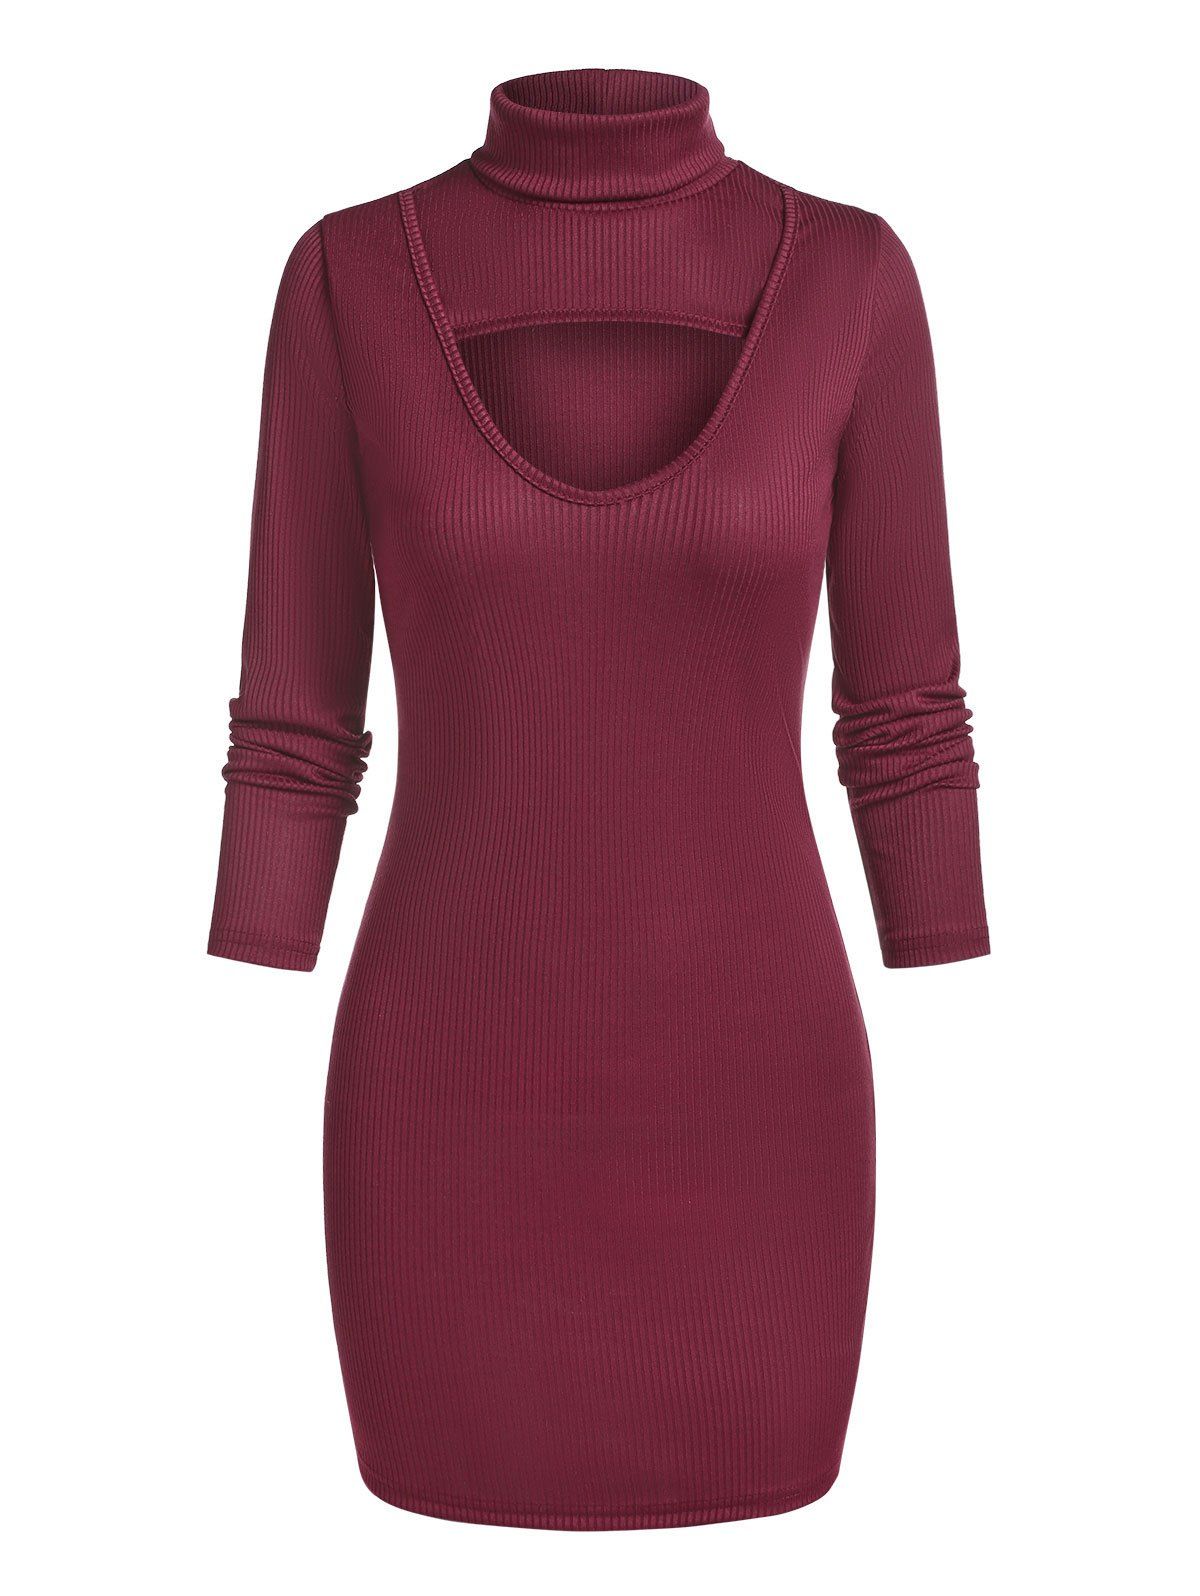 Long Sleeve Cut Out Ribbed Bodycon Dress - DEEP RED XL